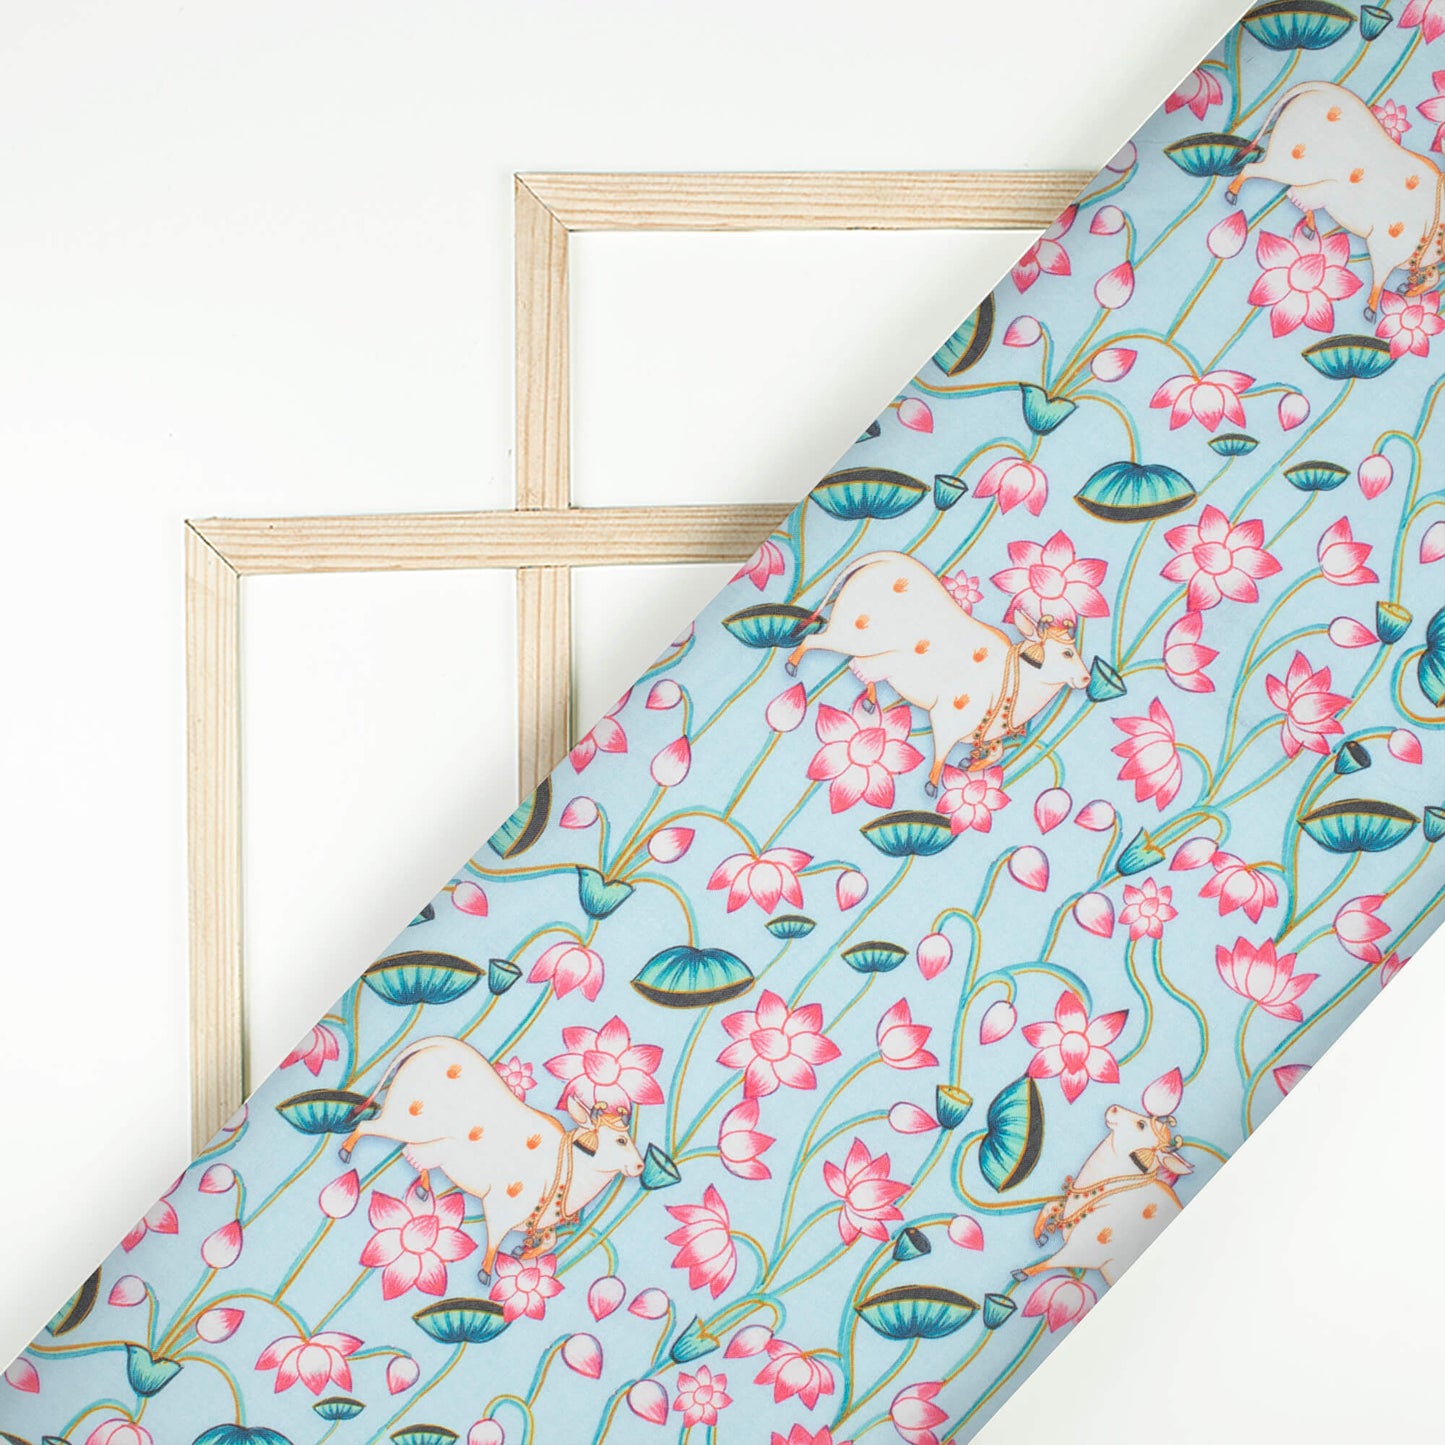 Light Blue And Taffy Pink Pichwaii Pattern Digital Print Poly Cambric Fabric